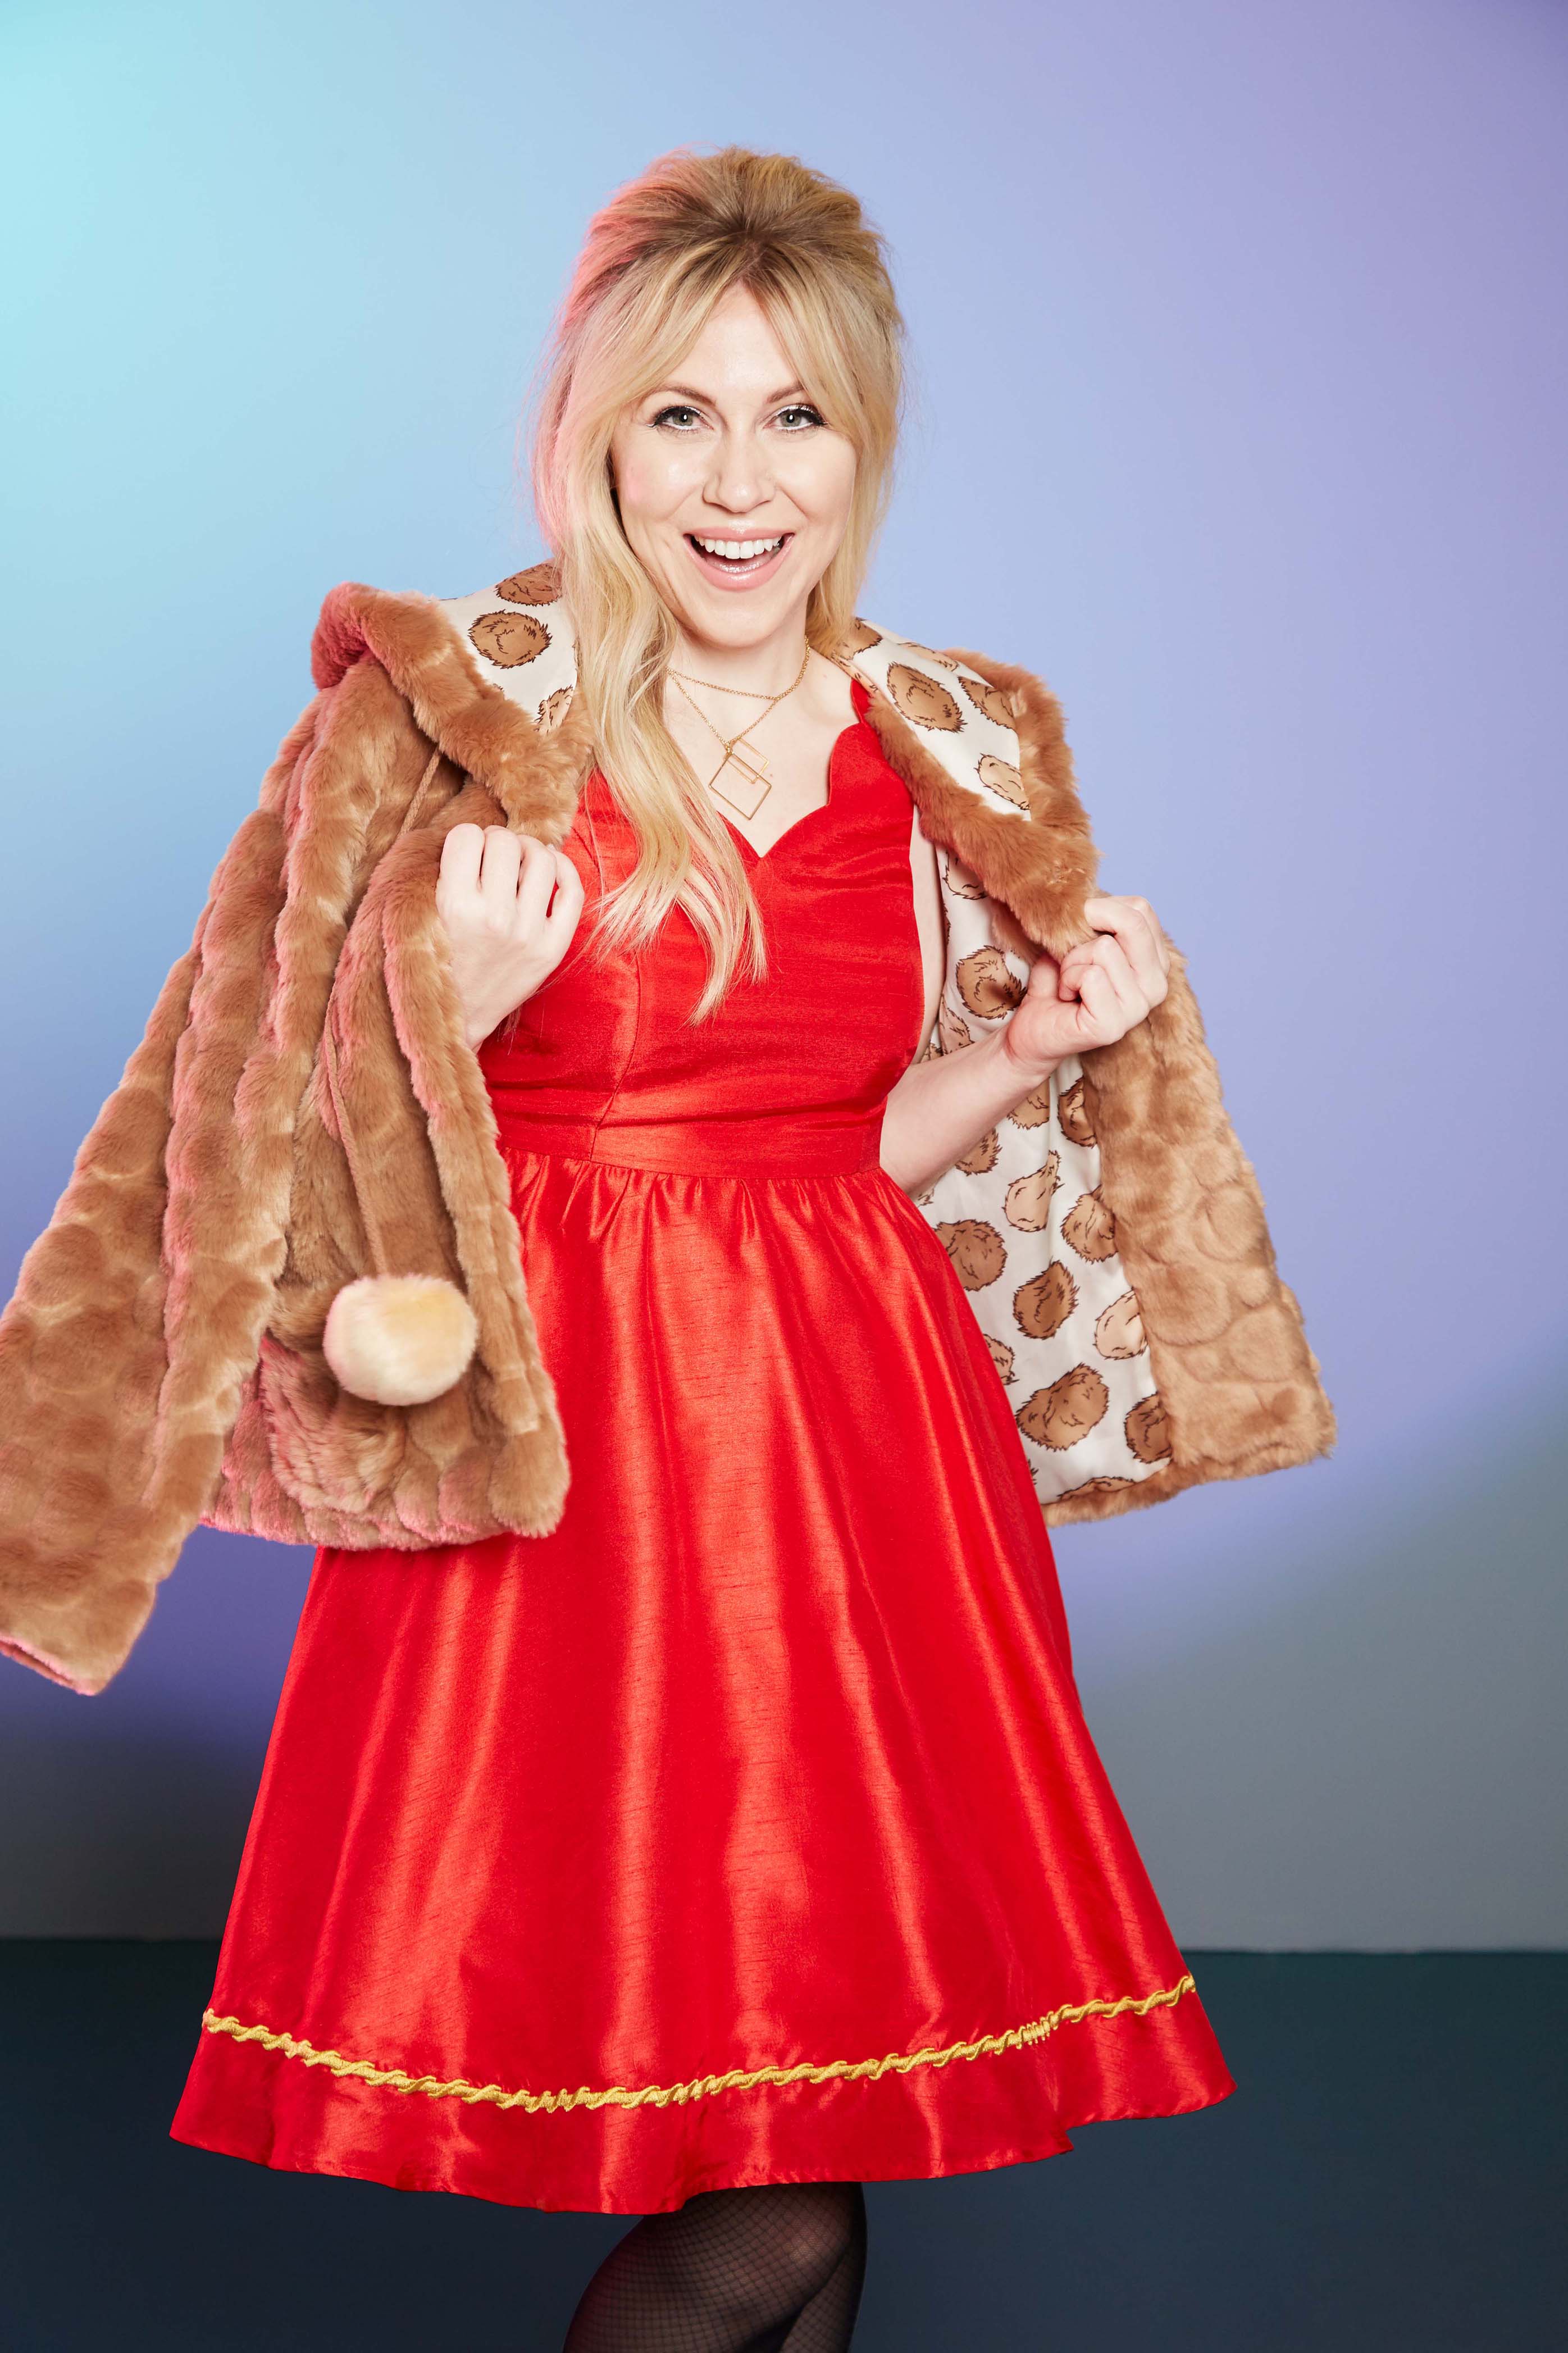 Part of the ThinkGeek Star Trek Collection by Her Universe is this stunning Star Trek Bardot Party Dress and Star Trek Tribble Faux Fur Coat.